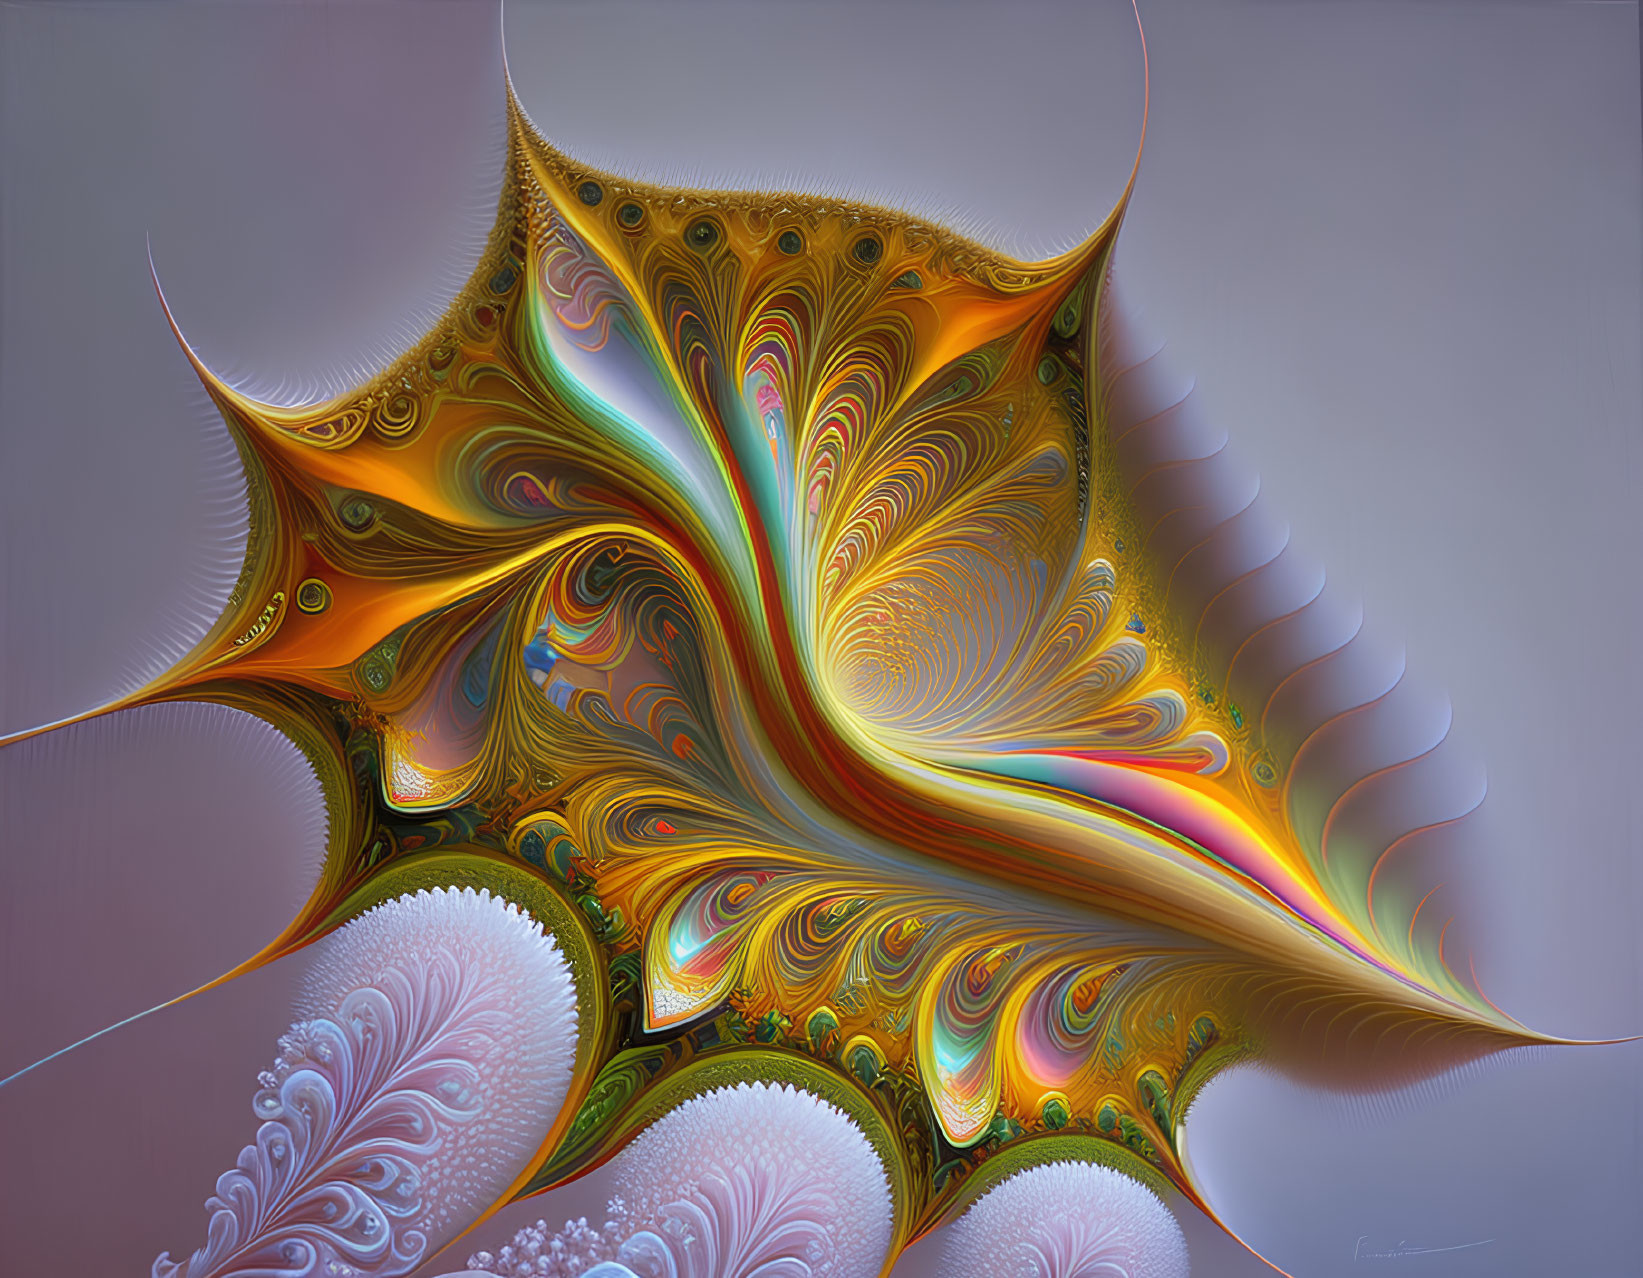 Abstract fractal image with swirling orange, gold, and green patterns